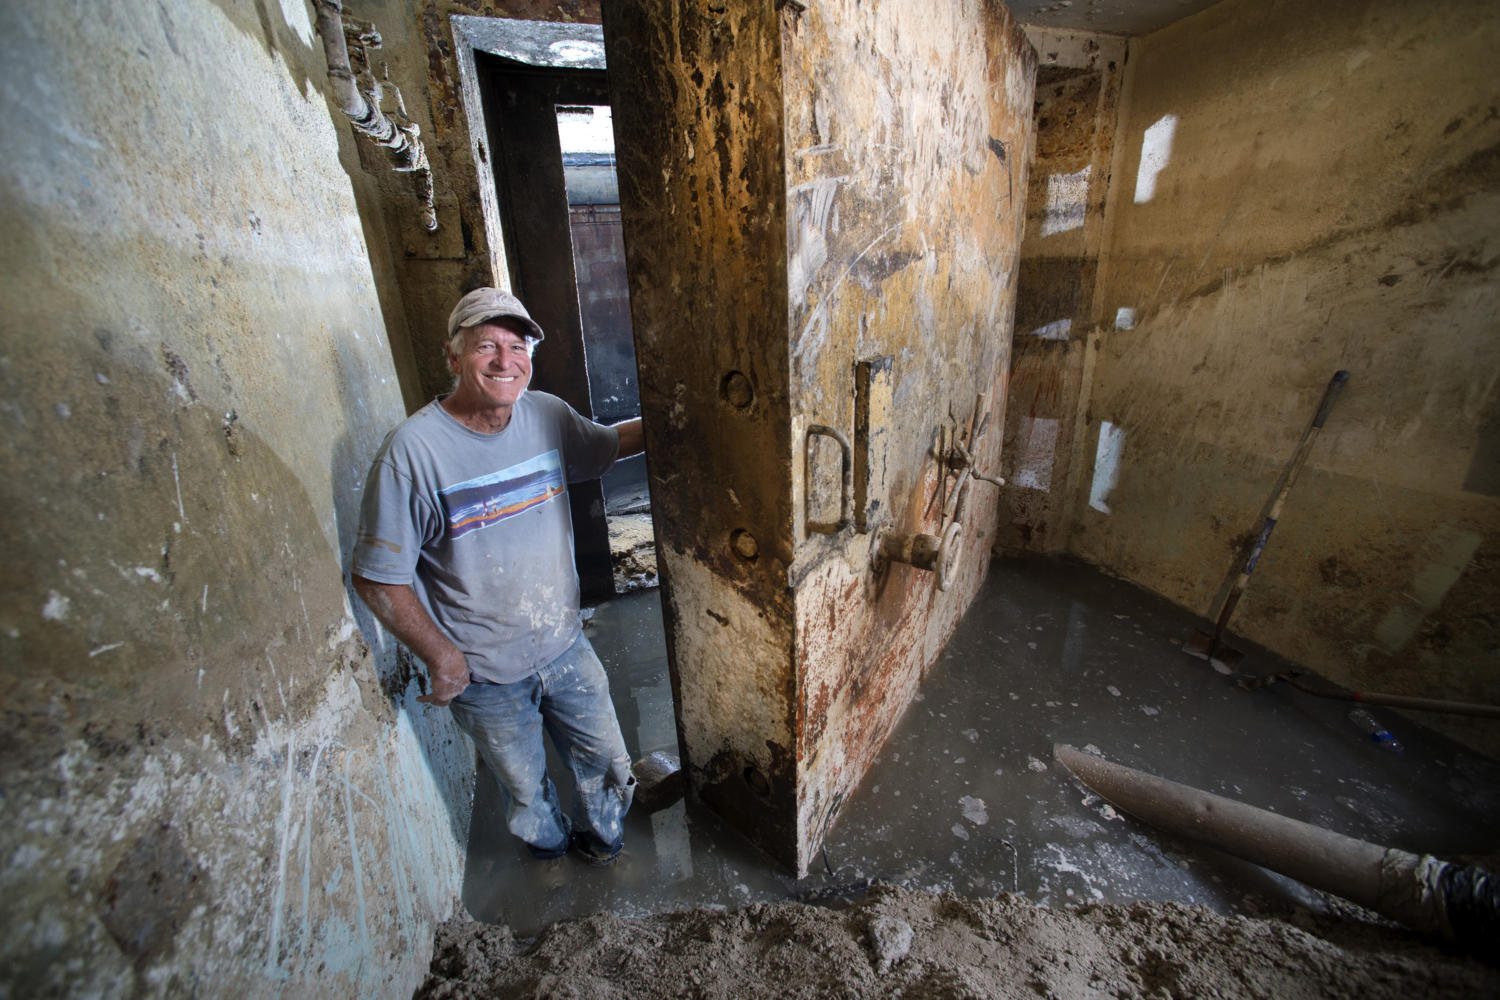 It took two years of fighting red tape into months of excavating concrete and water, but Russ Nielsen was determined to find out what was inside this long-ago decommissioned missile launch complex in central Missouri. (Joe Ledford/Kansas City Star/TNS)